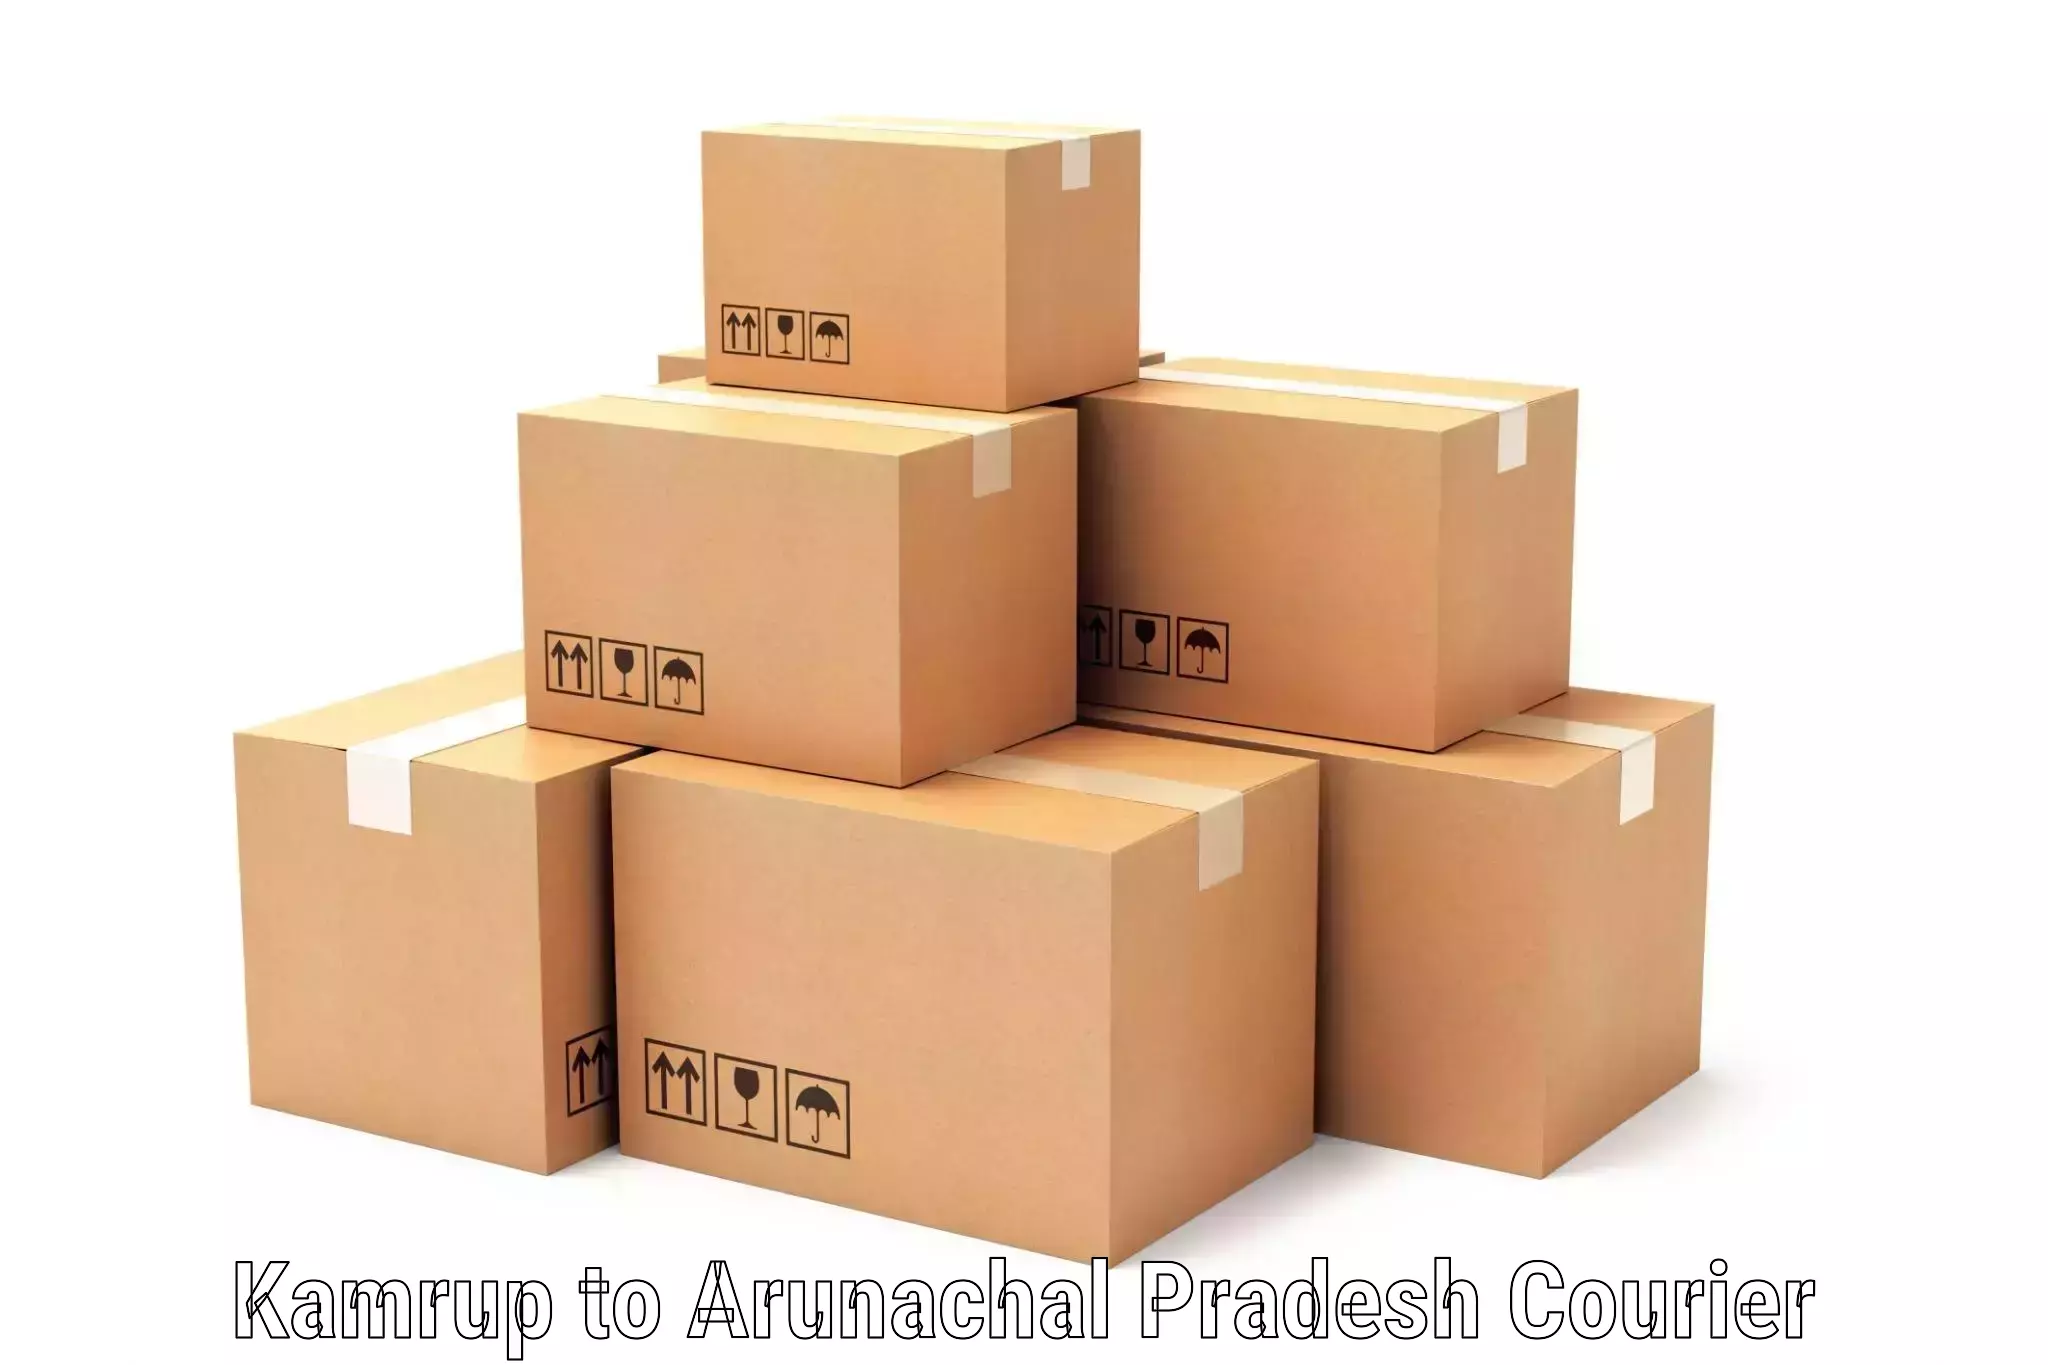 Easy access courier services in Kamrup to Tezu